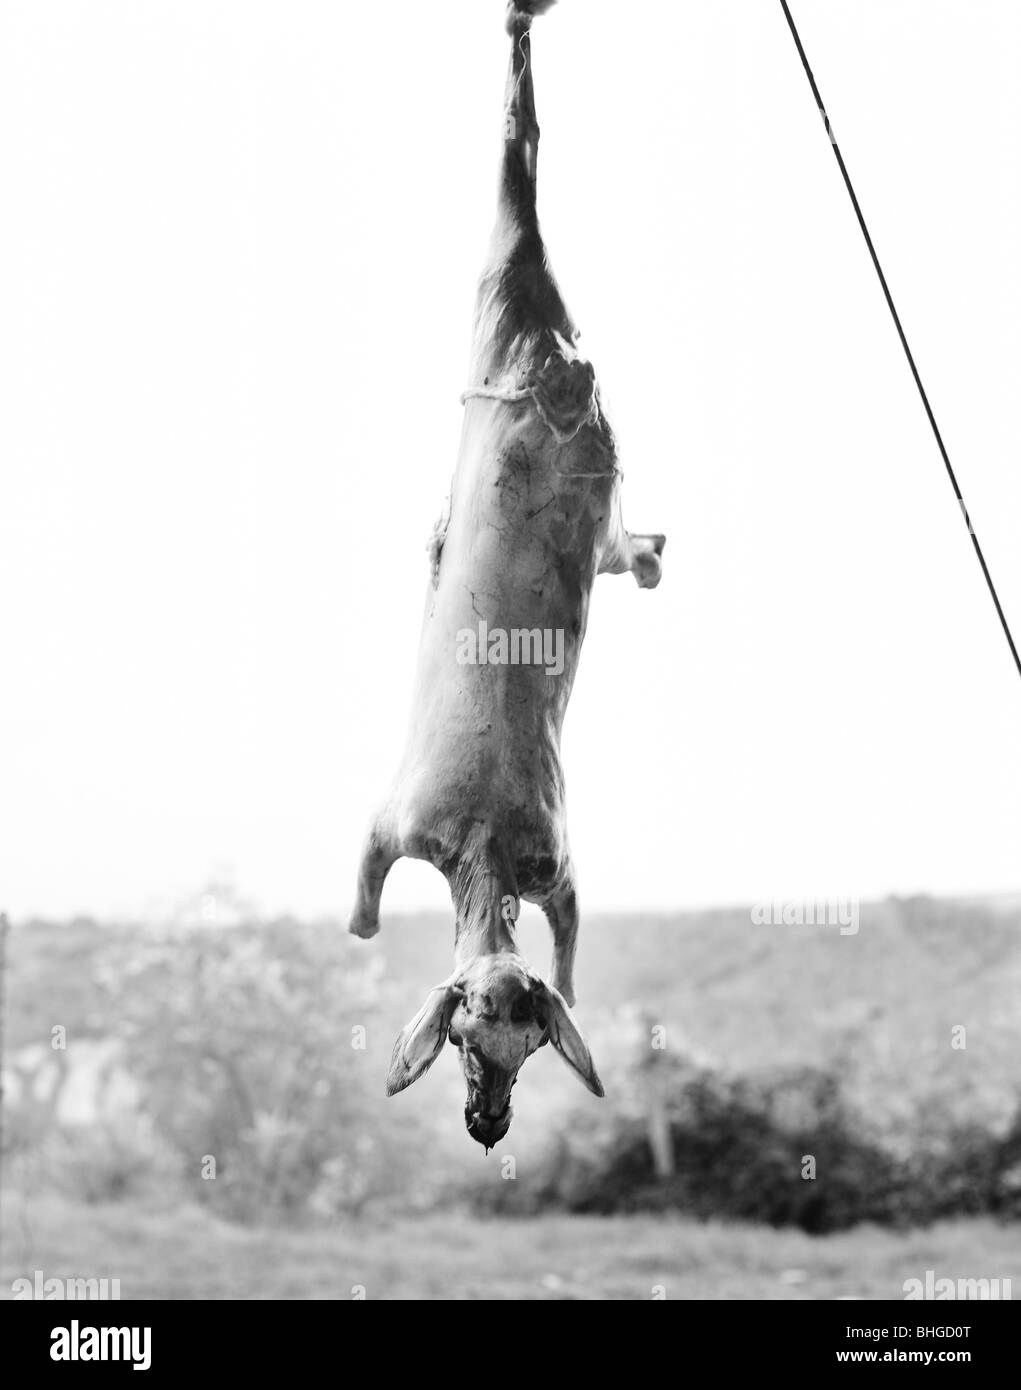 A killed lamb hanging upside down, Italy. Stock Photo